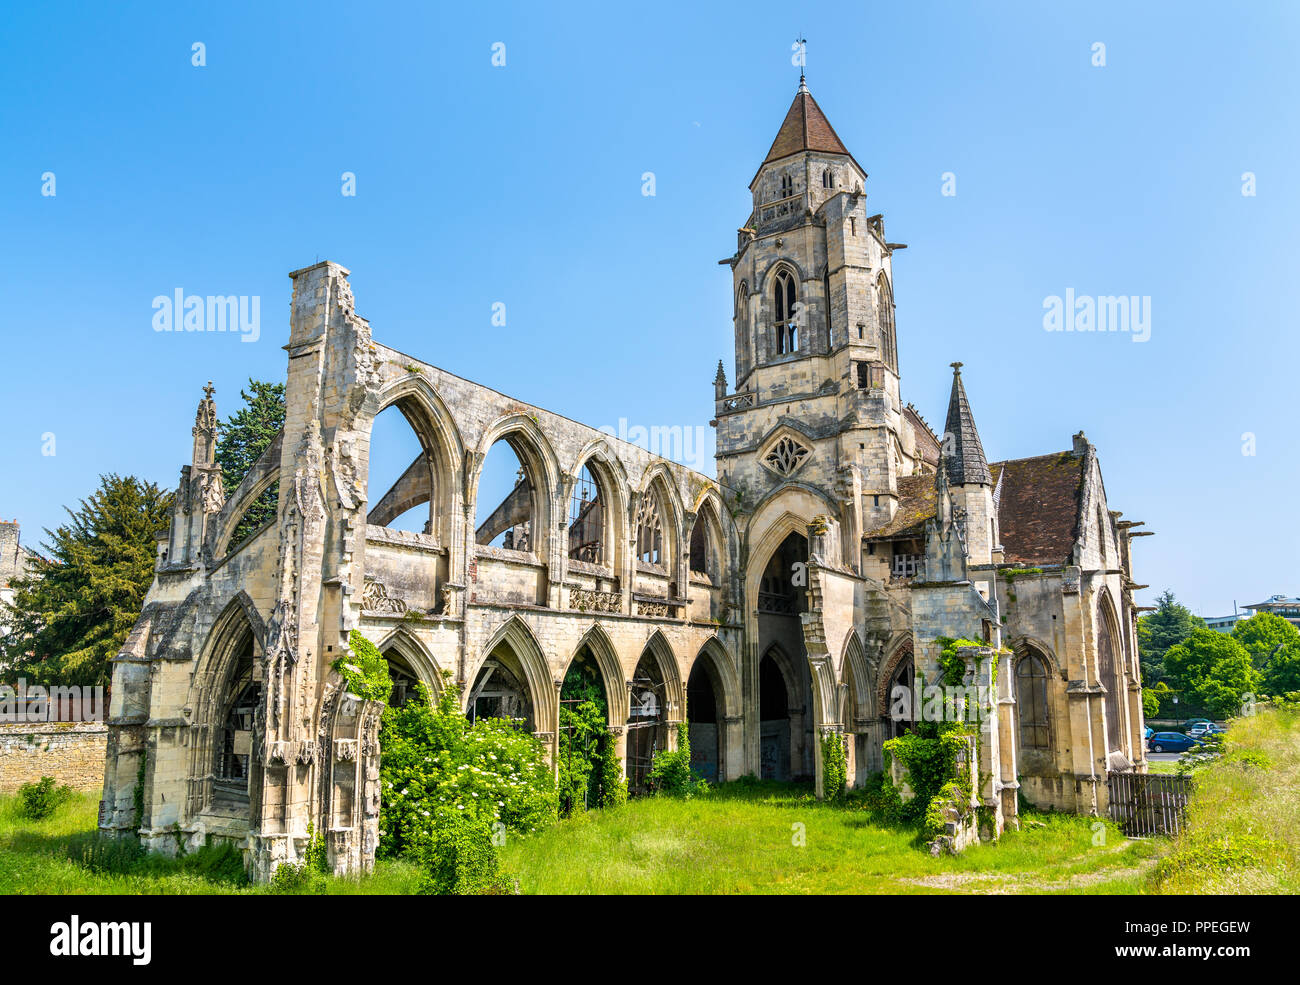 The Church of Saint-Etienne-le-Vieux in Caen, France Stock Photo